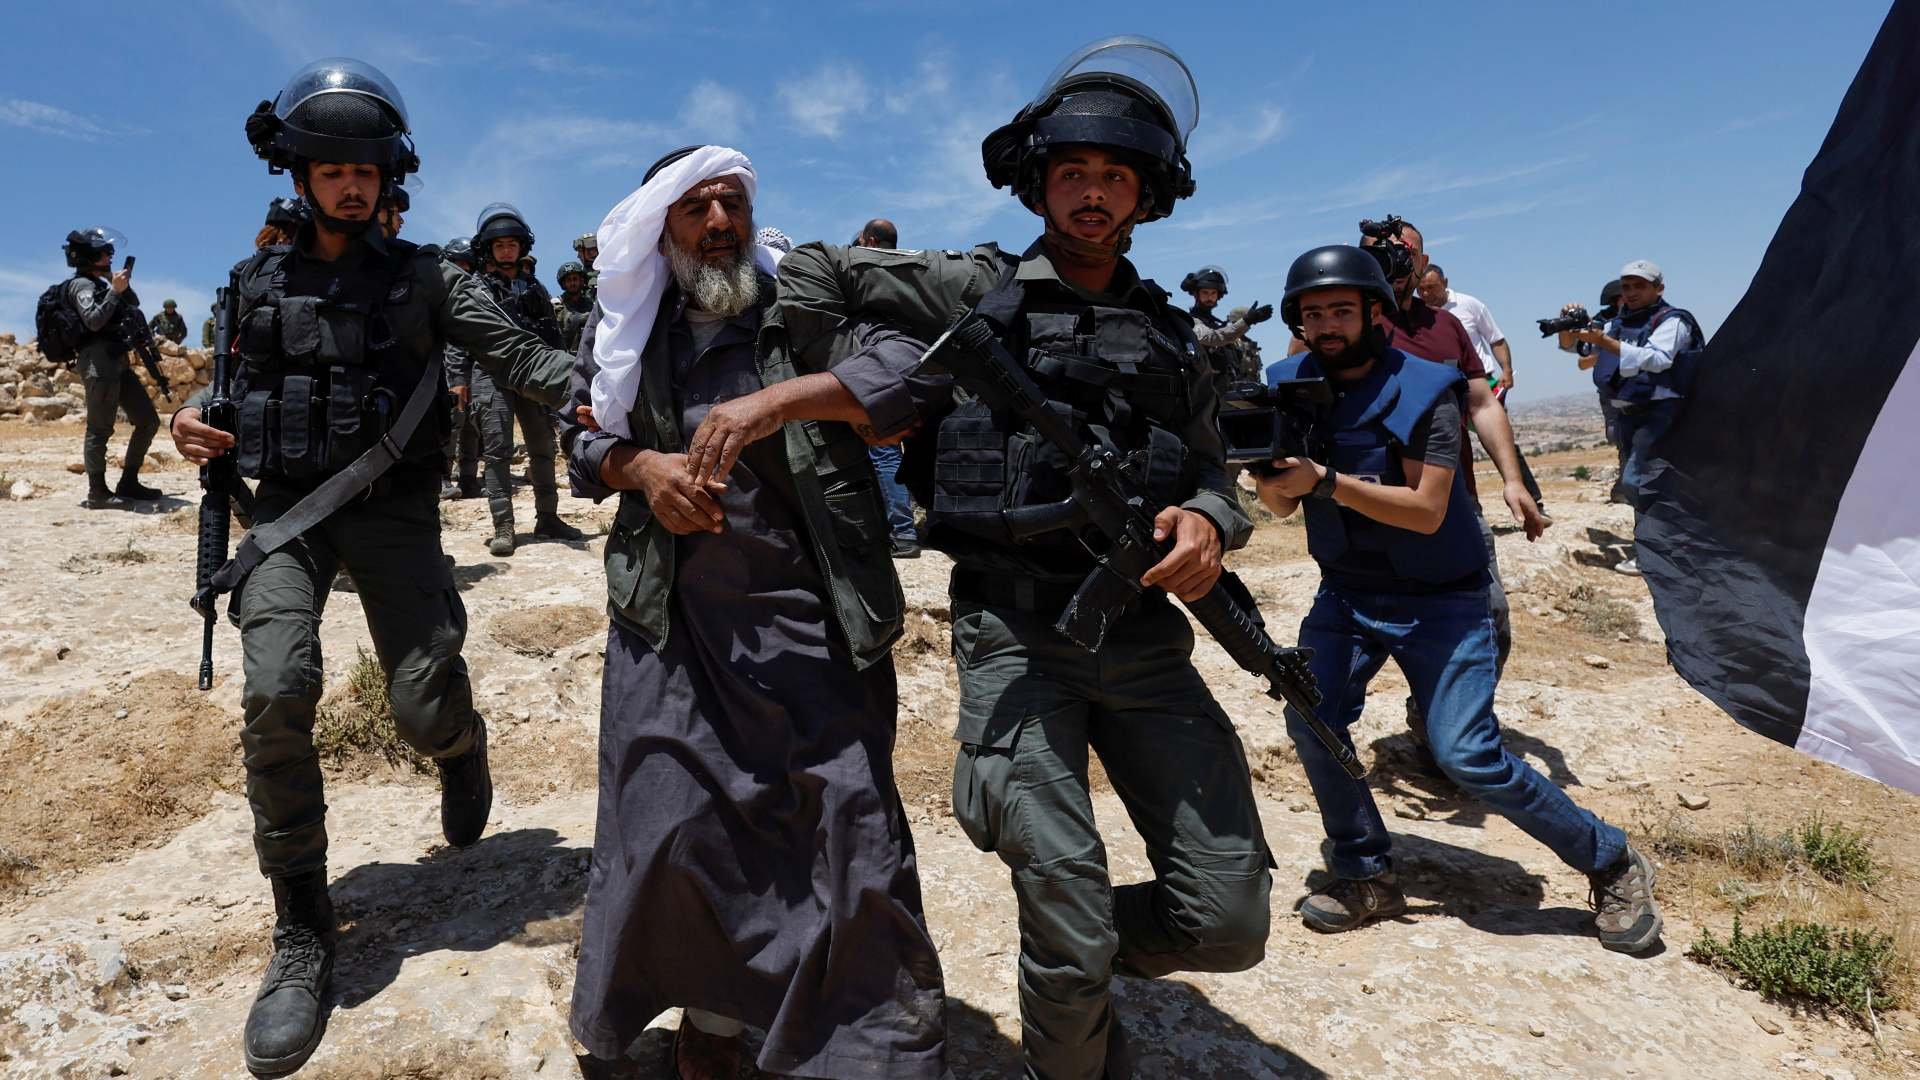 Israeli troops move away an elderly Palestinian man during a protest after Israeli top court paved way for razing eight Palestinian hamlets in Masafer Yatta in the Israeli-occupied West Bank on 20 May 2022.